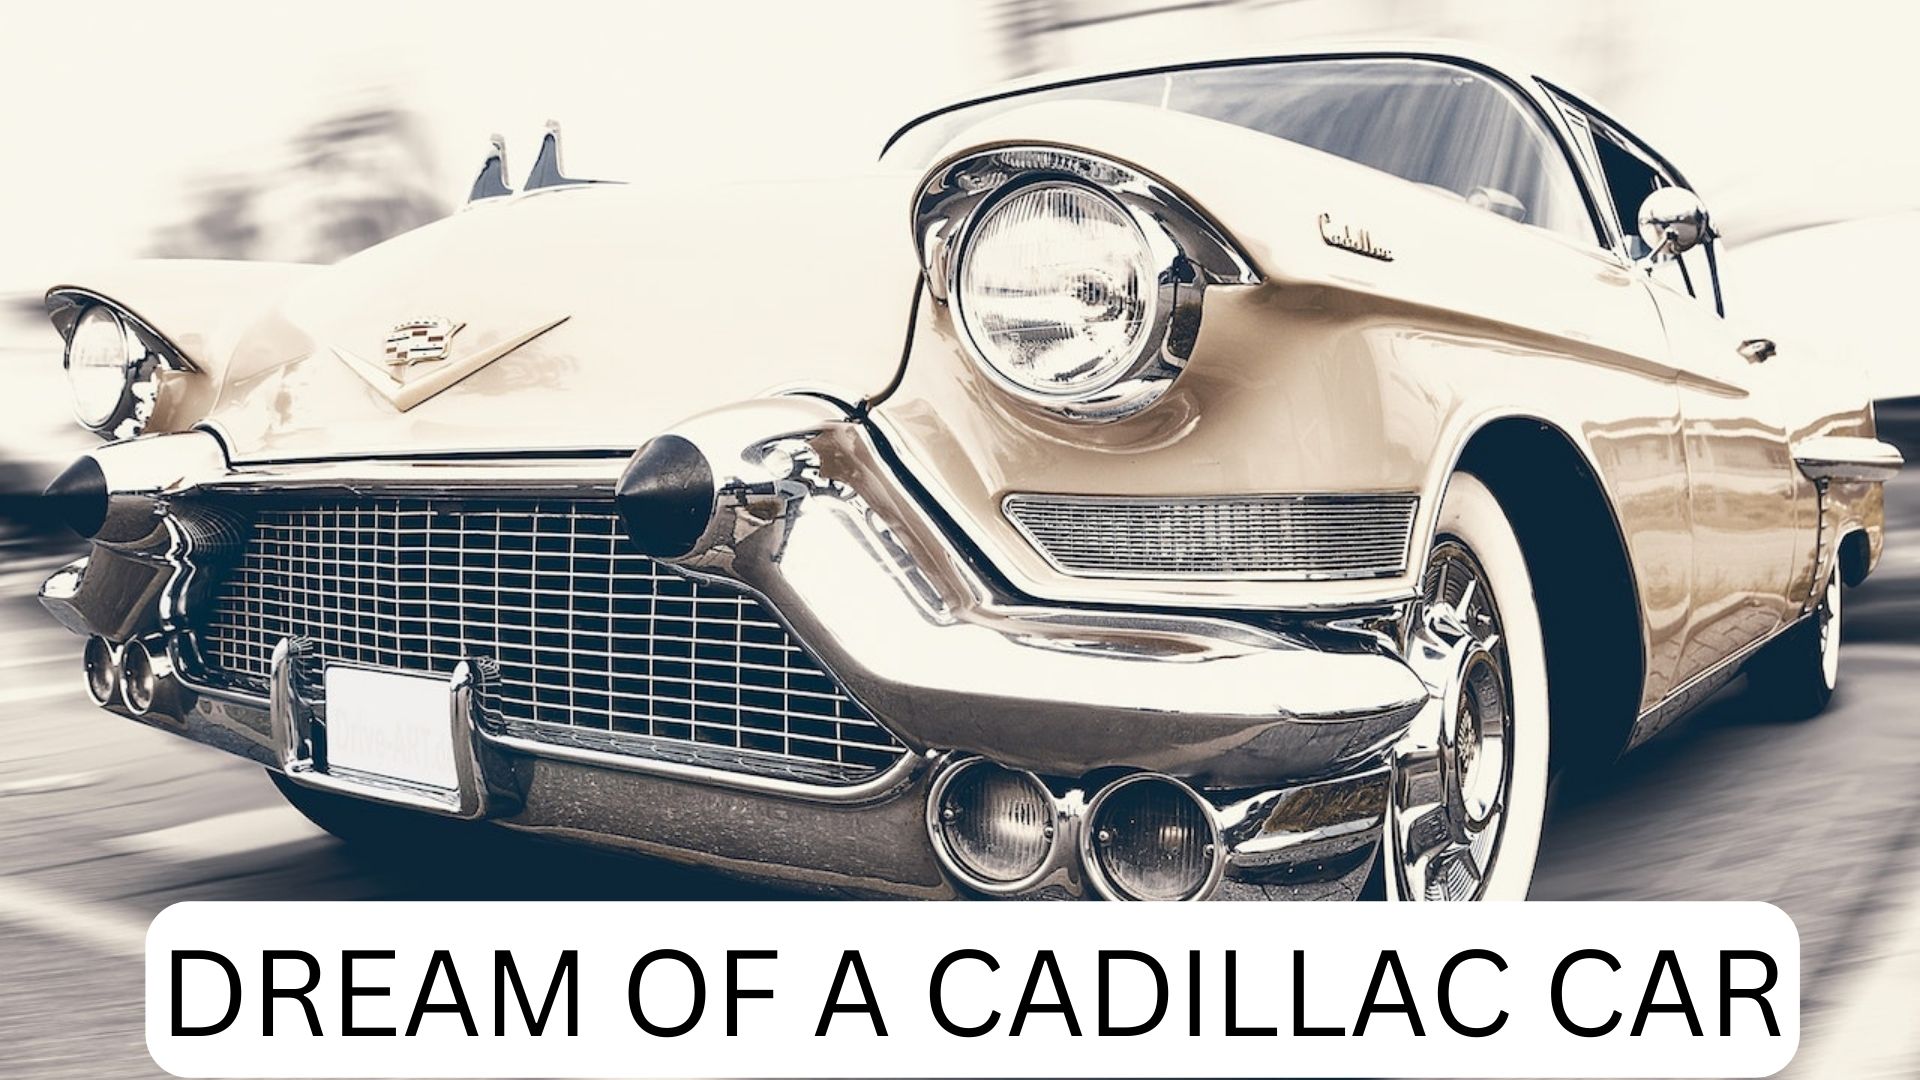 Dream Of A Cadillac Car - Symbolizes An Approaching Deadline For A Project